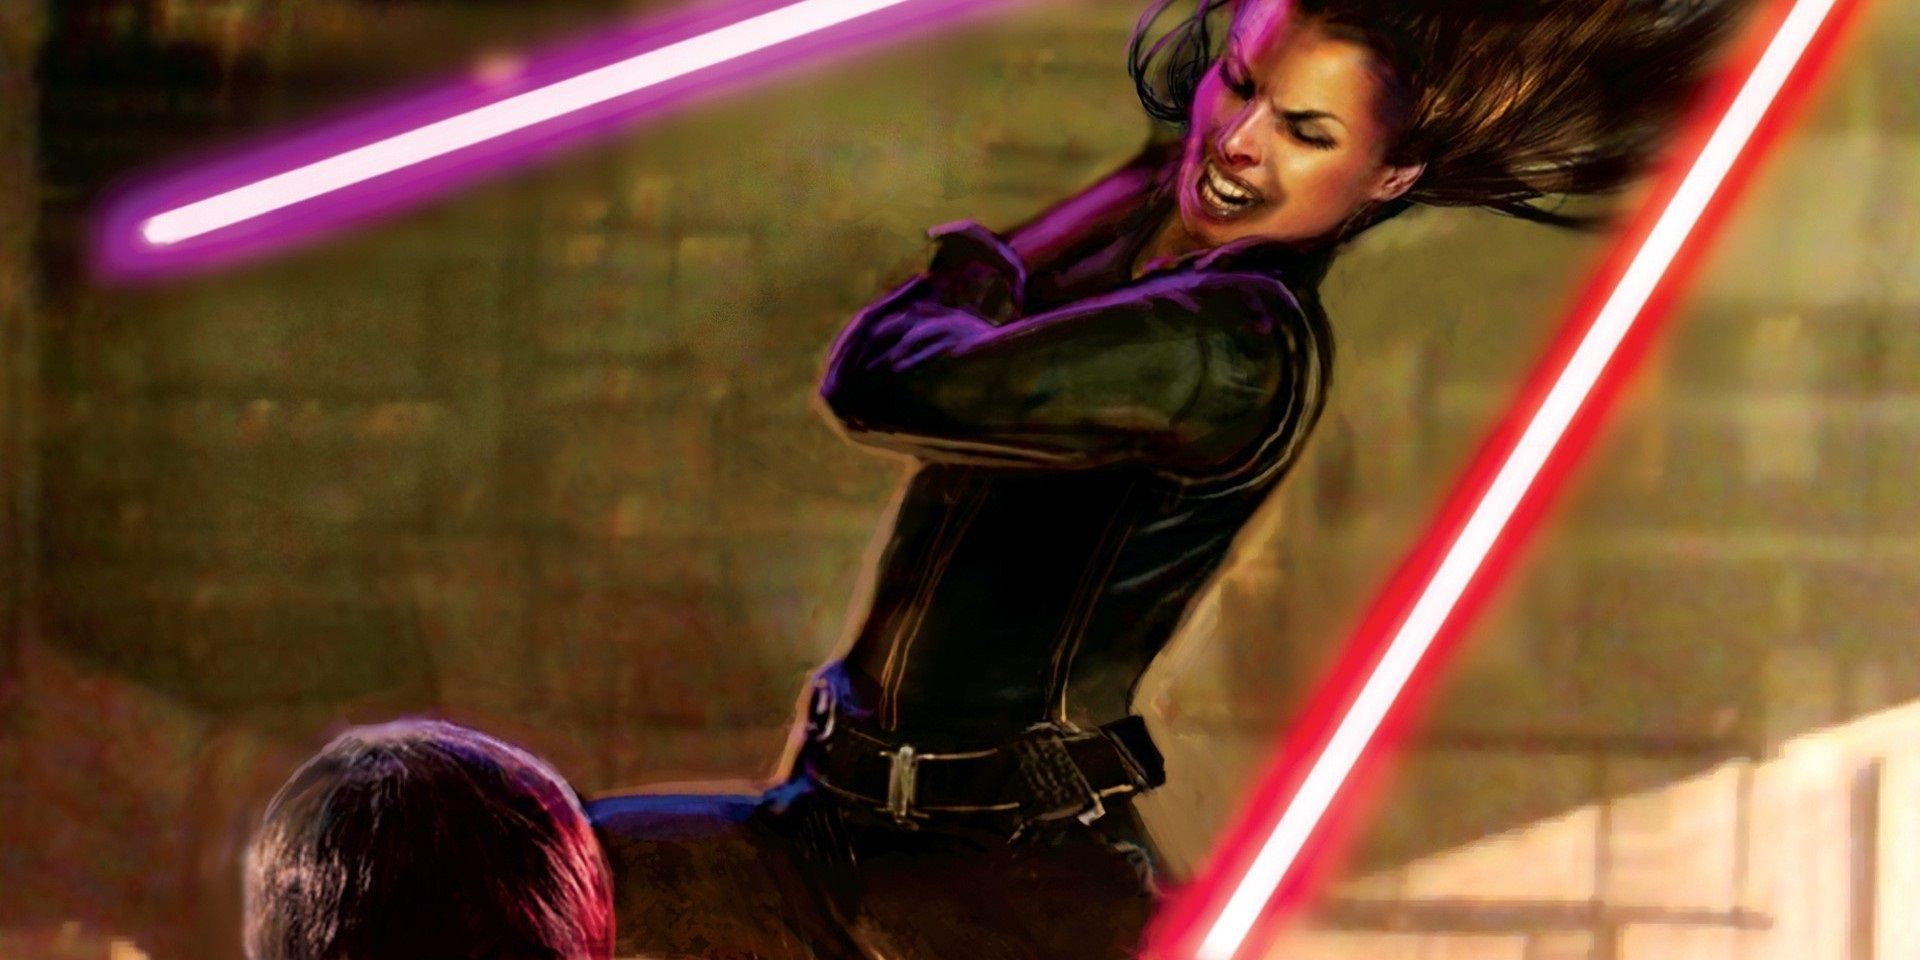 Star Wars Legends' Jaina Solo battling her brother Darth Caedus from the cover of Star Wars: Legacy of the Force: Invincible